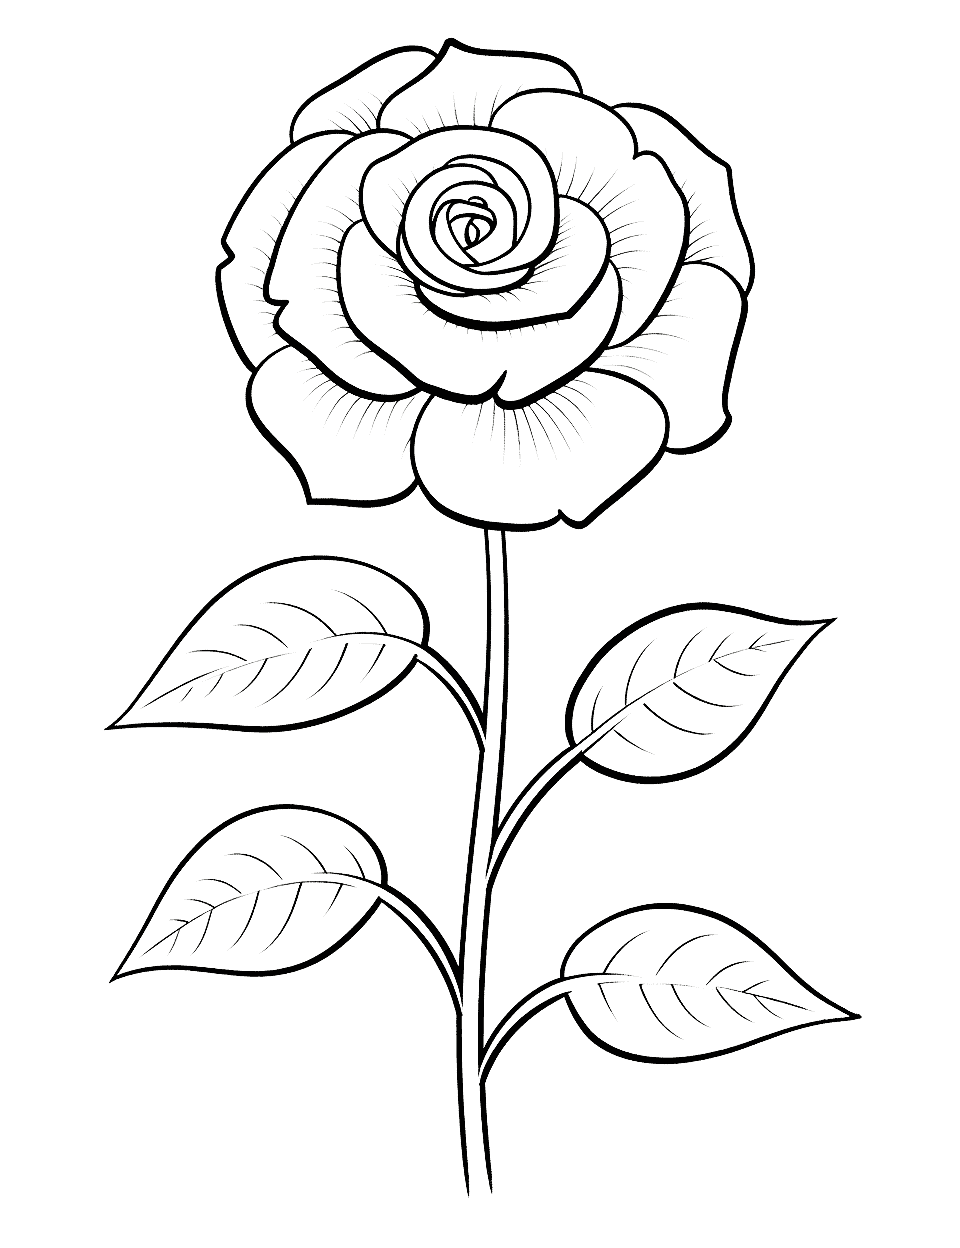 Realistic Rose Flower Coloring Page - A detailed, realistic rose drawing for advanced colorists.